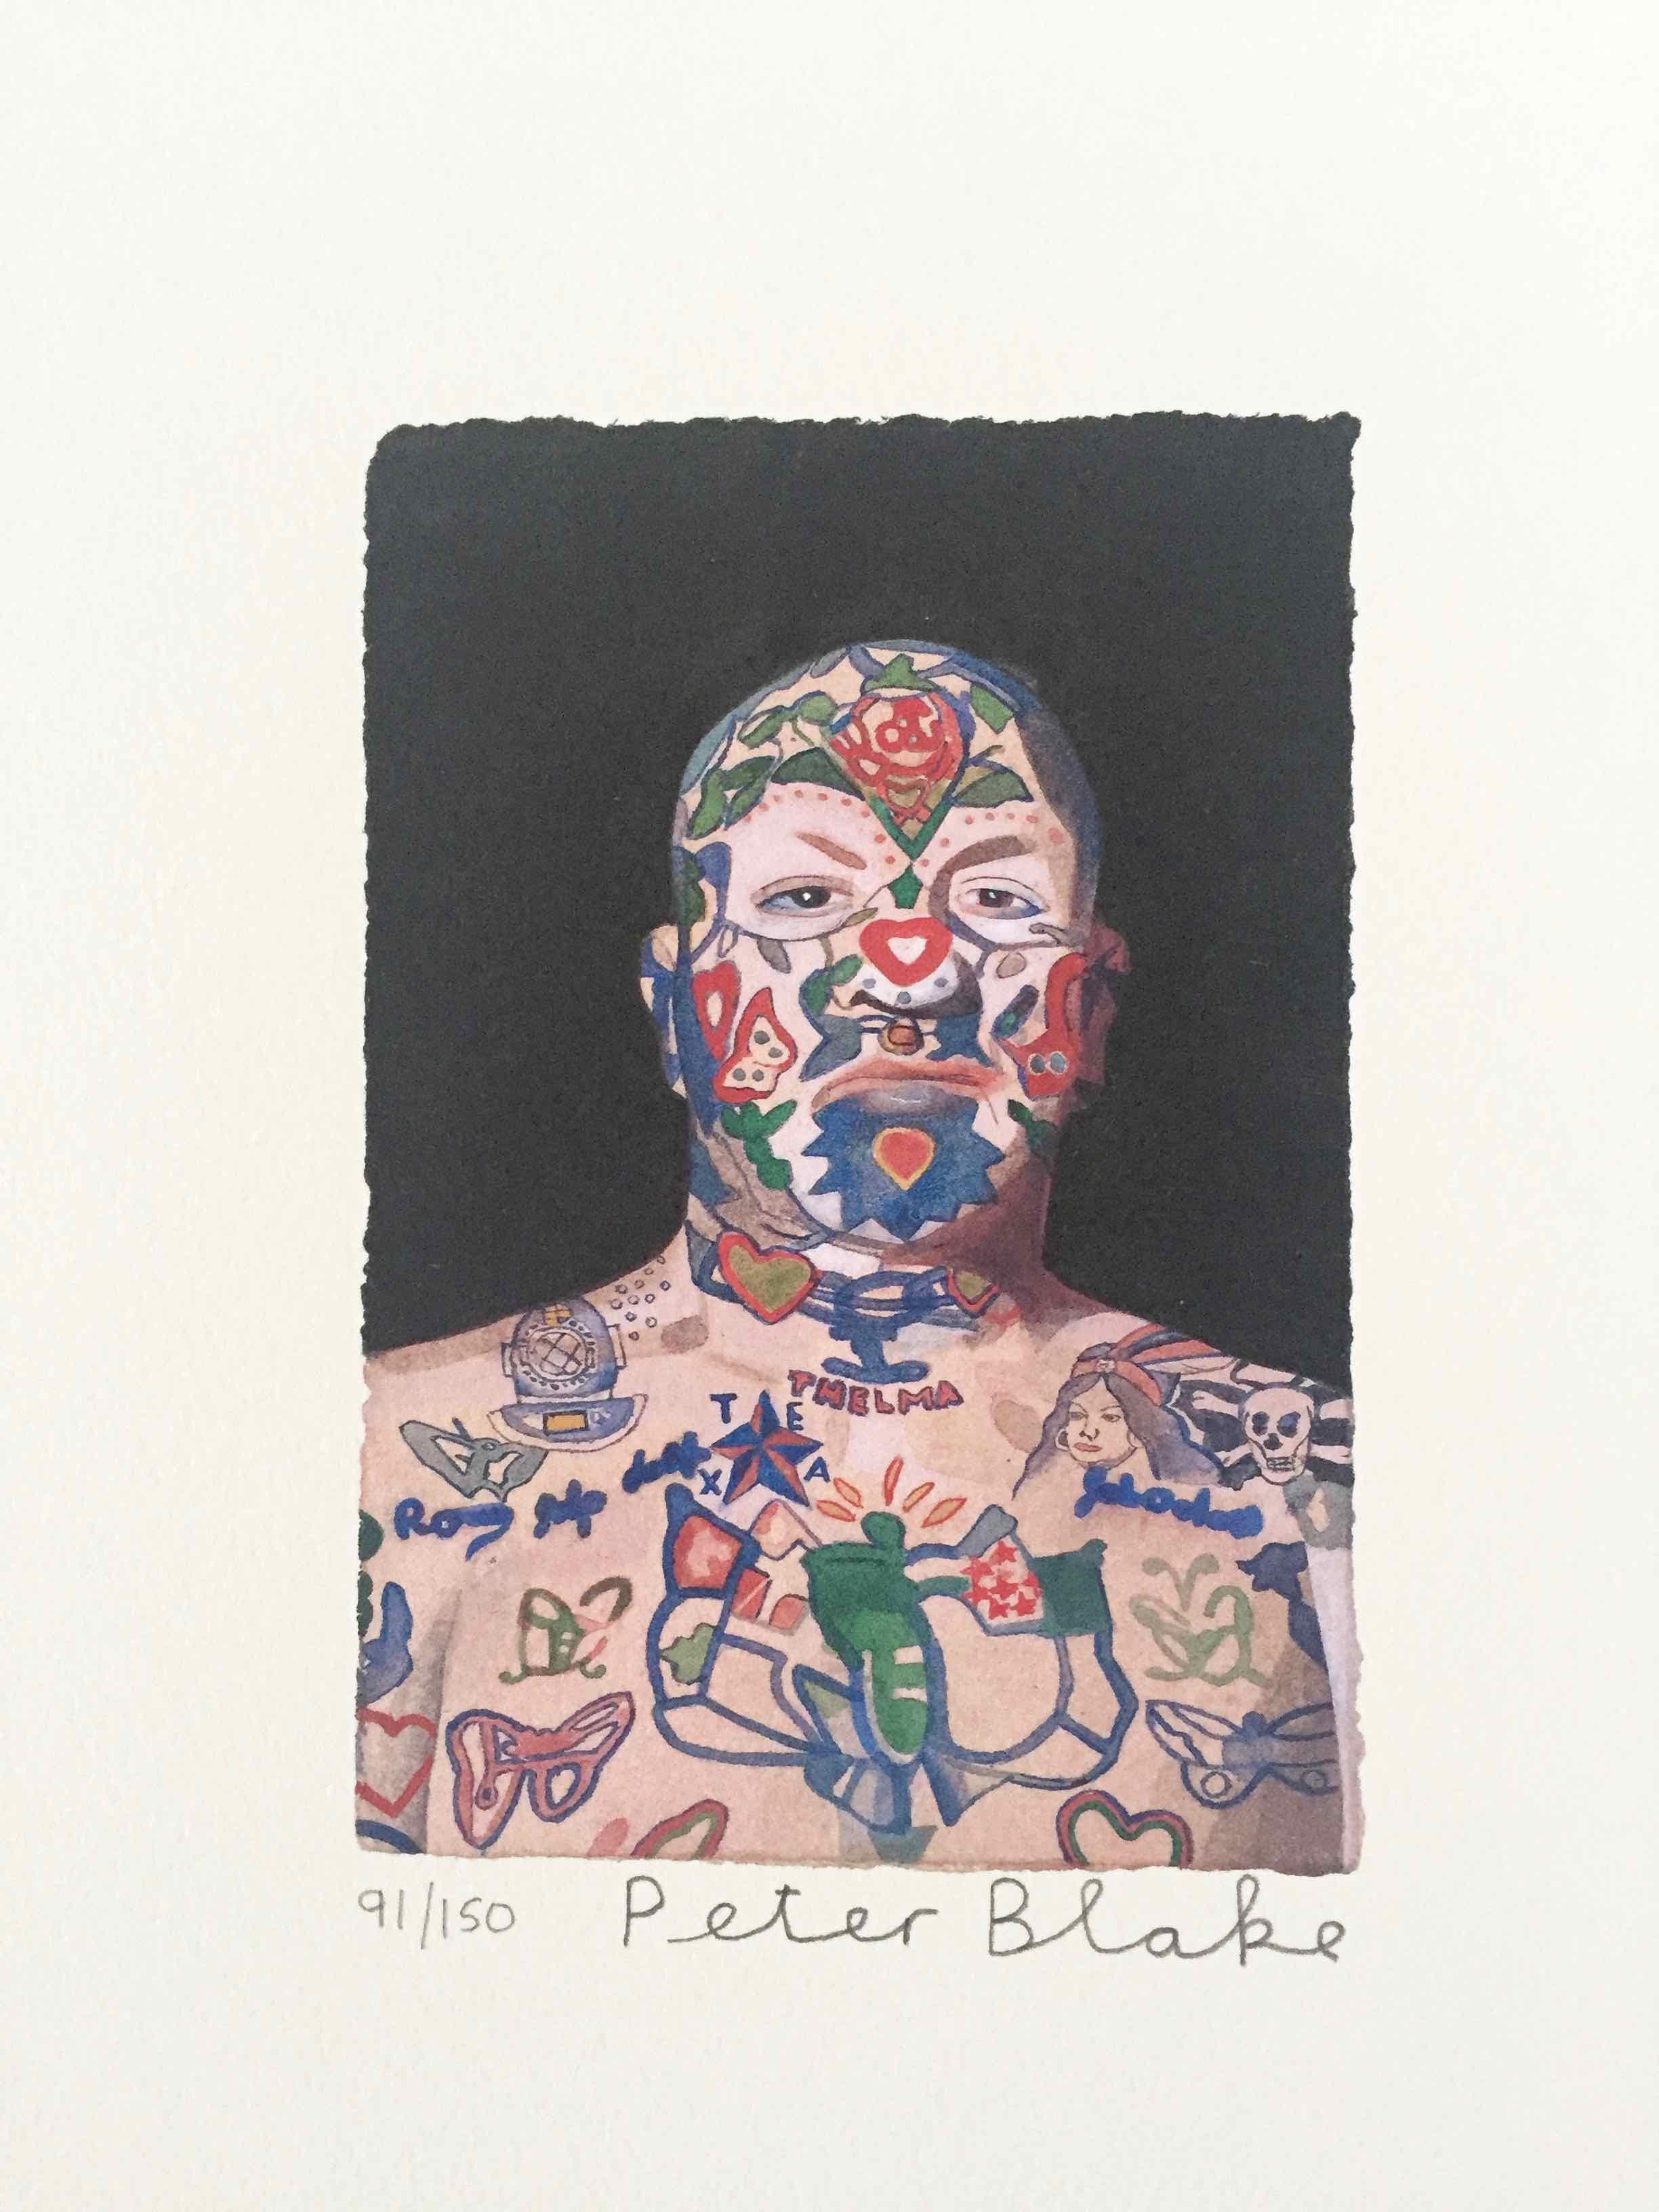 Tattooed People, Ron, 2015, Archival limited edition inkjet print on photo rag satin paper, Edition 91/150, 11 × 8 3/10 in, 28 × 21 cm, signed and numbered by Sir Peter Blake (unframed)

Widely regarded as the godfather of British Pop art and the